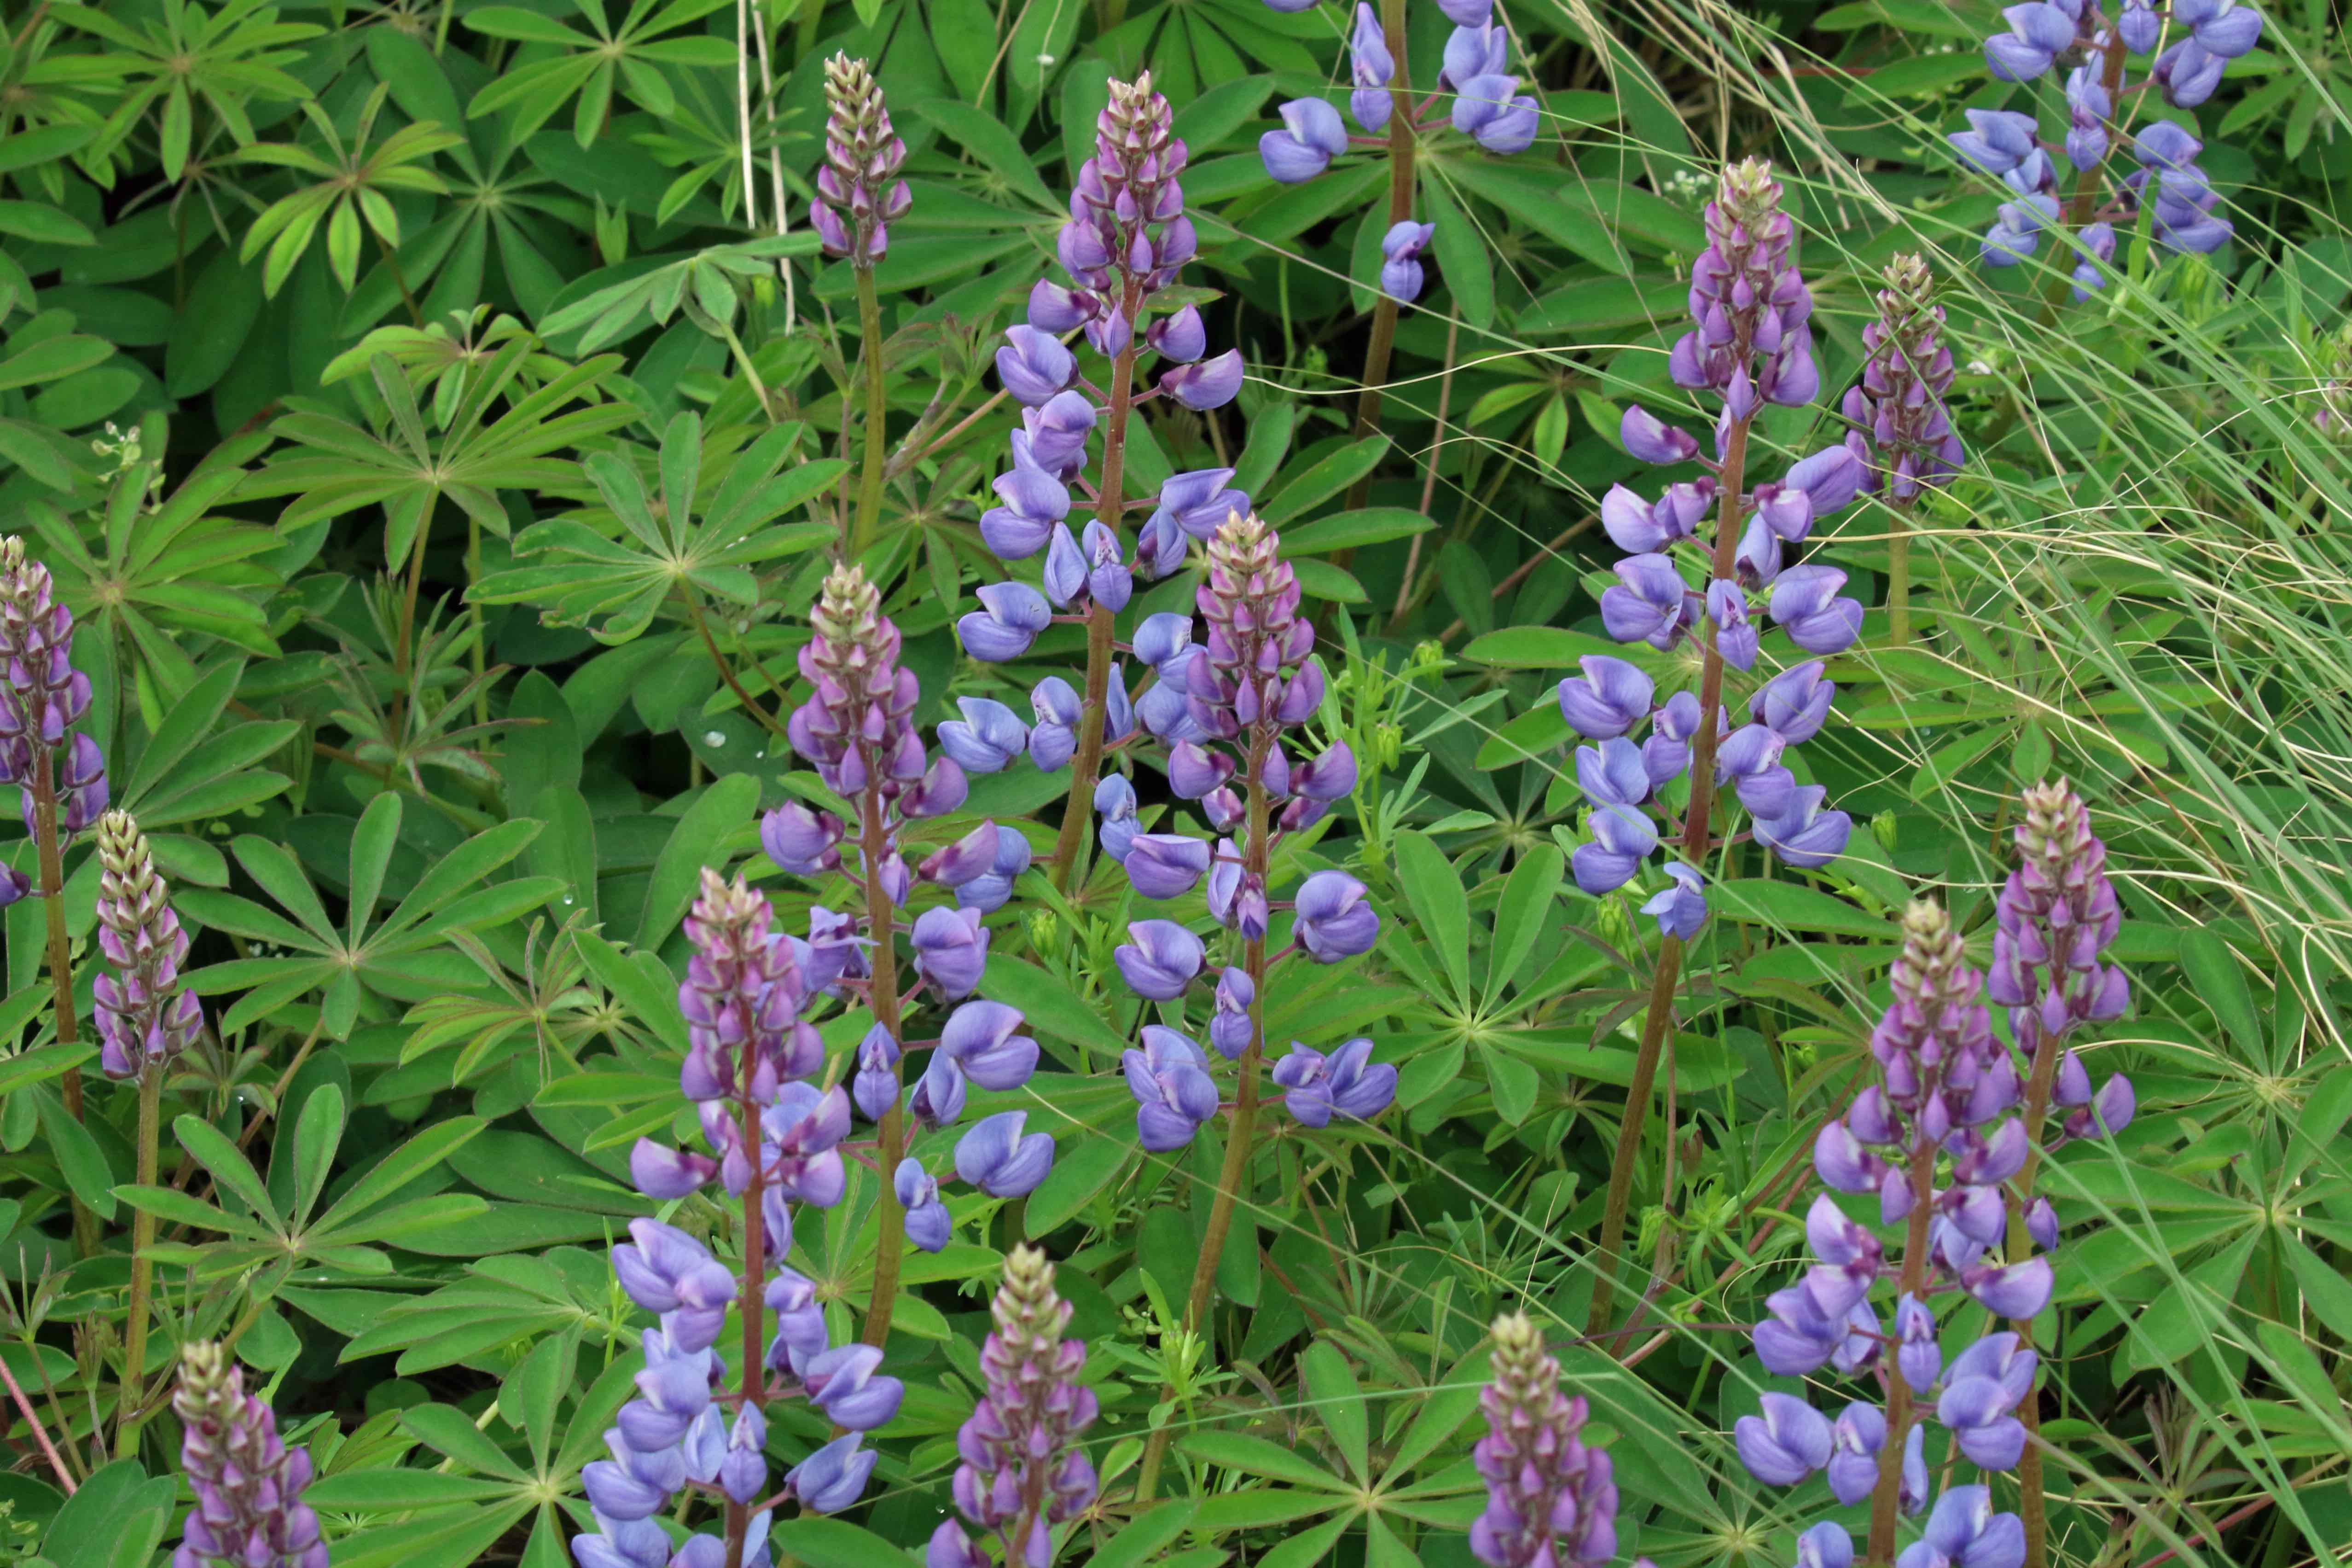 The Scientific Name is Lupinus perennis ssp. perennis. You will likely hear them called Northern Sundial Lupine. This picture shows the Sundial Lupine is unmistakable with palmately divided leaves on long petioles and pea-like flowers in slender, erect racemes. of Lupinus perennis ssp. perennis